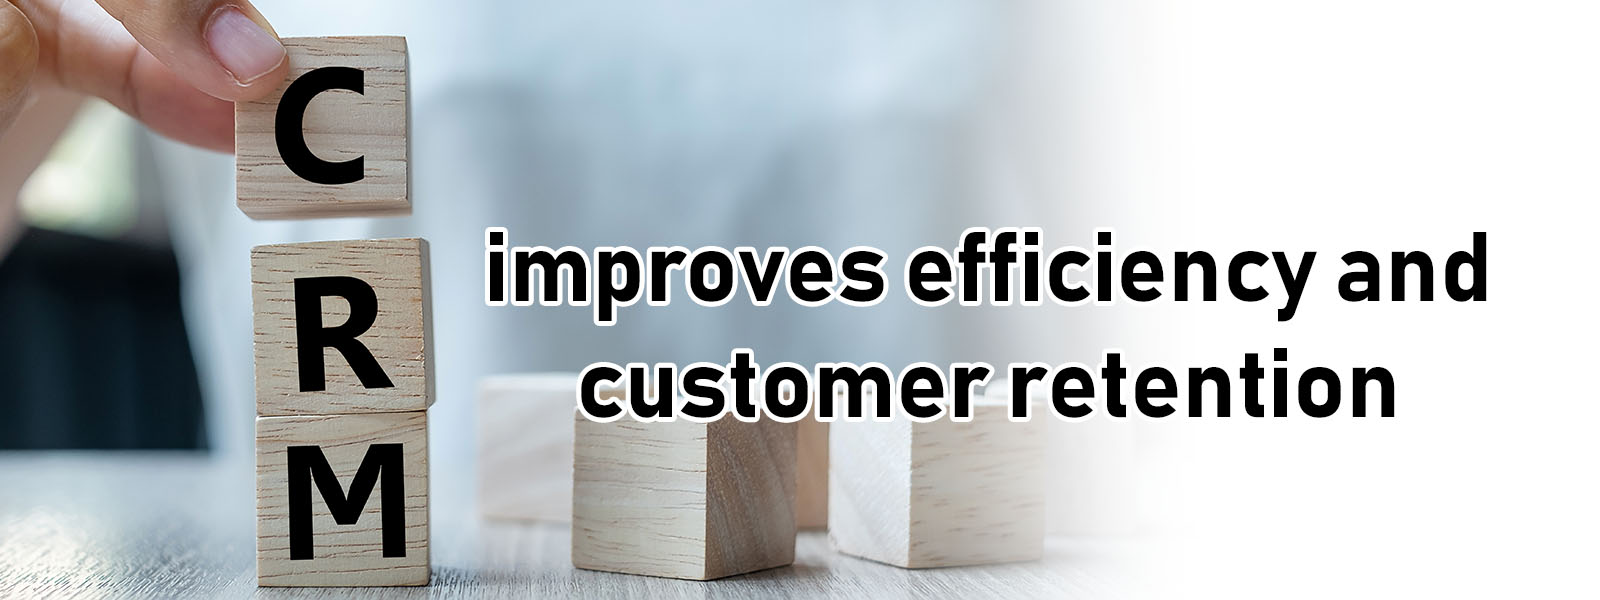 improves efficiency and customer retention